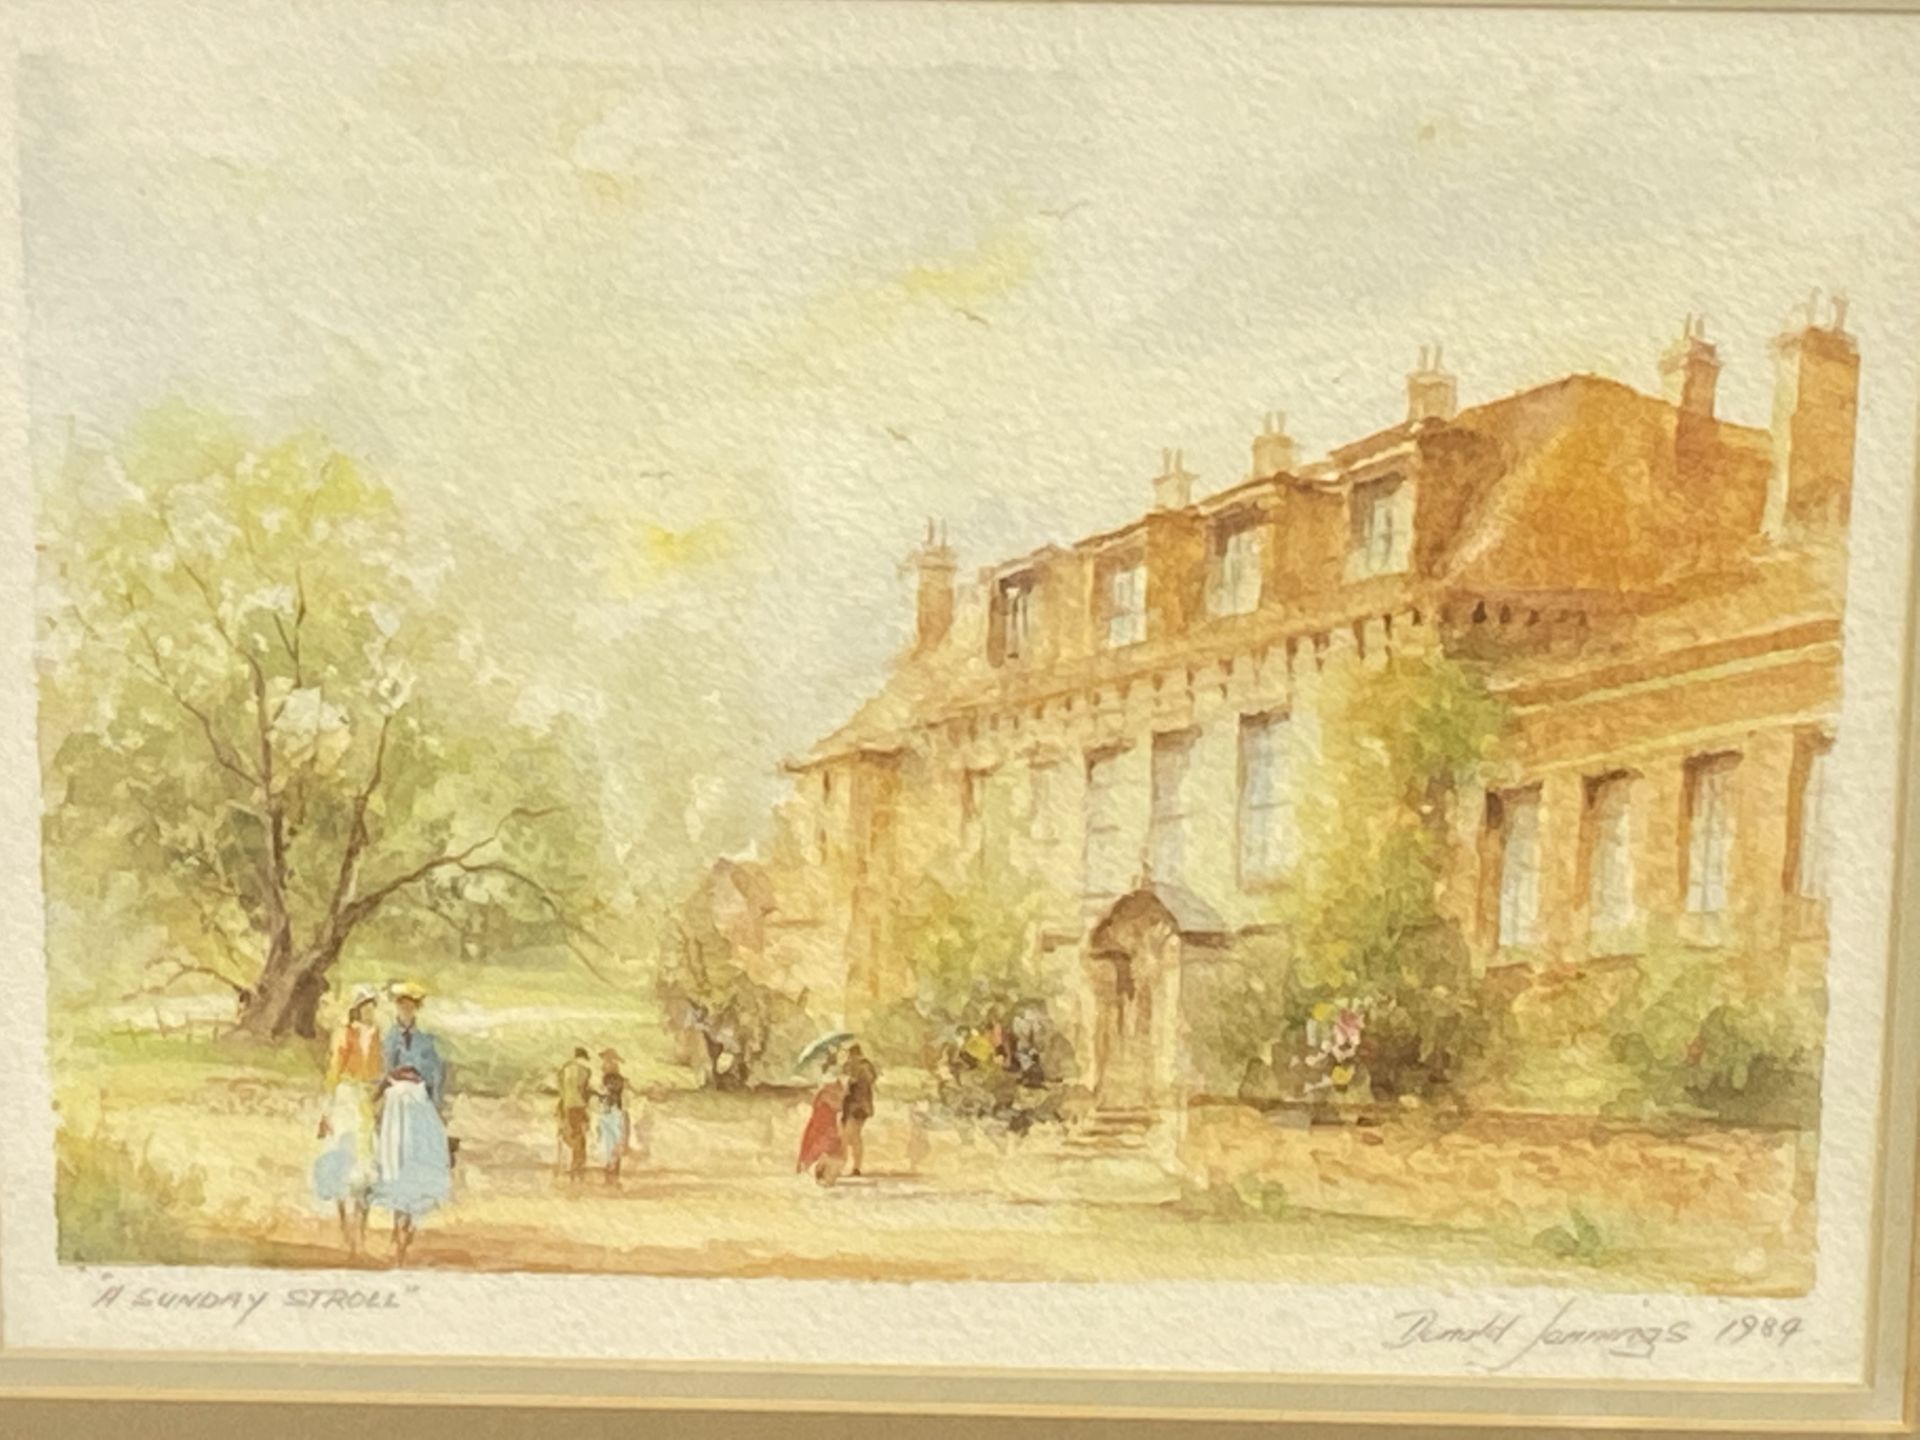 Framed and glazed watercolour 'A Sunday Stroll' - Image 2 of 4